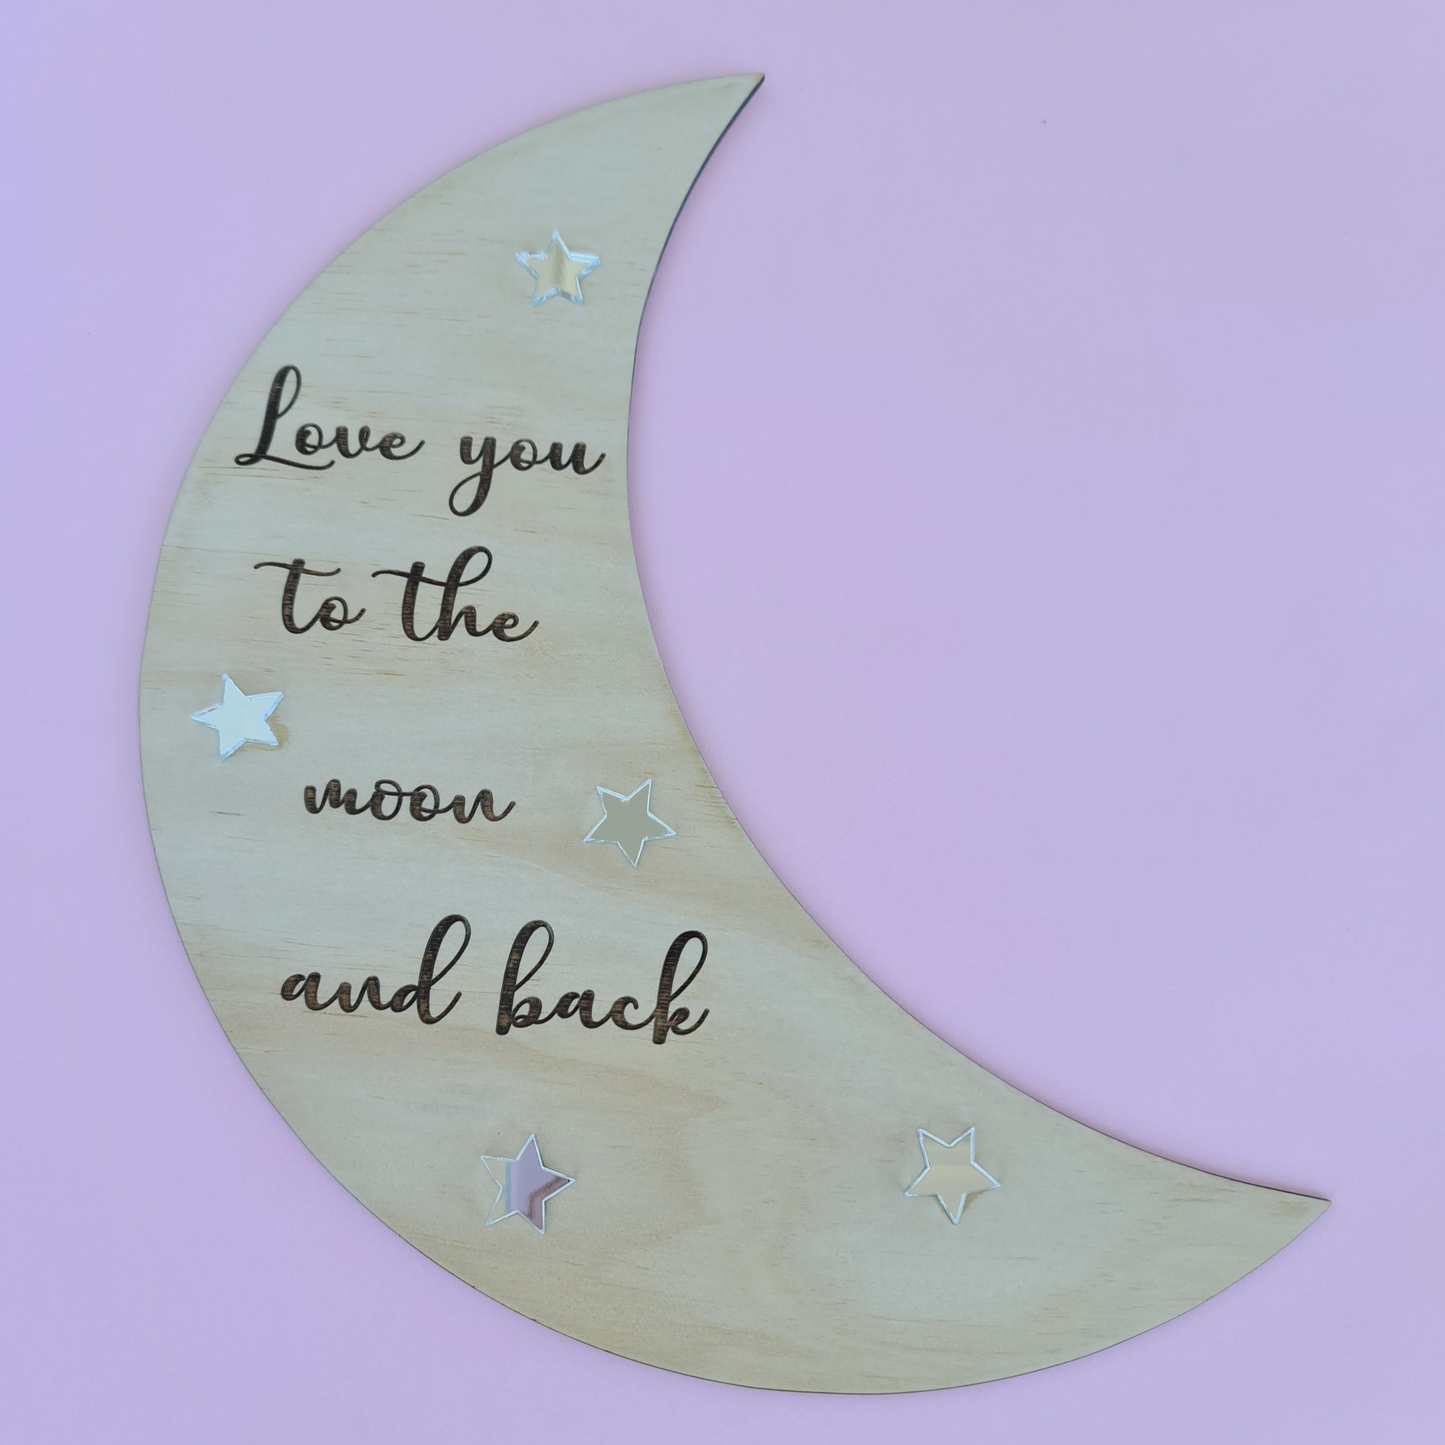 'Love you to the moon and back' wall piece